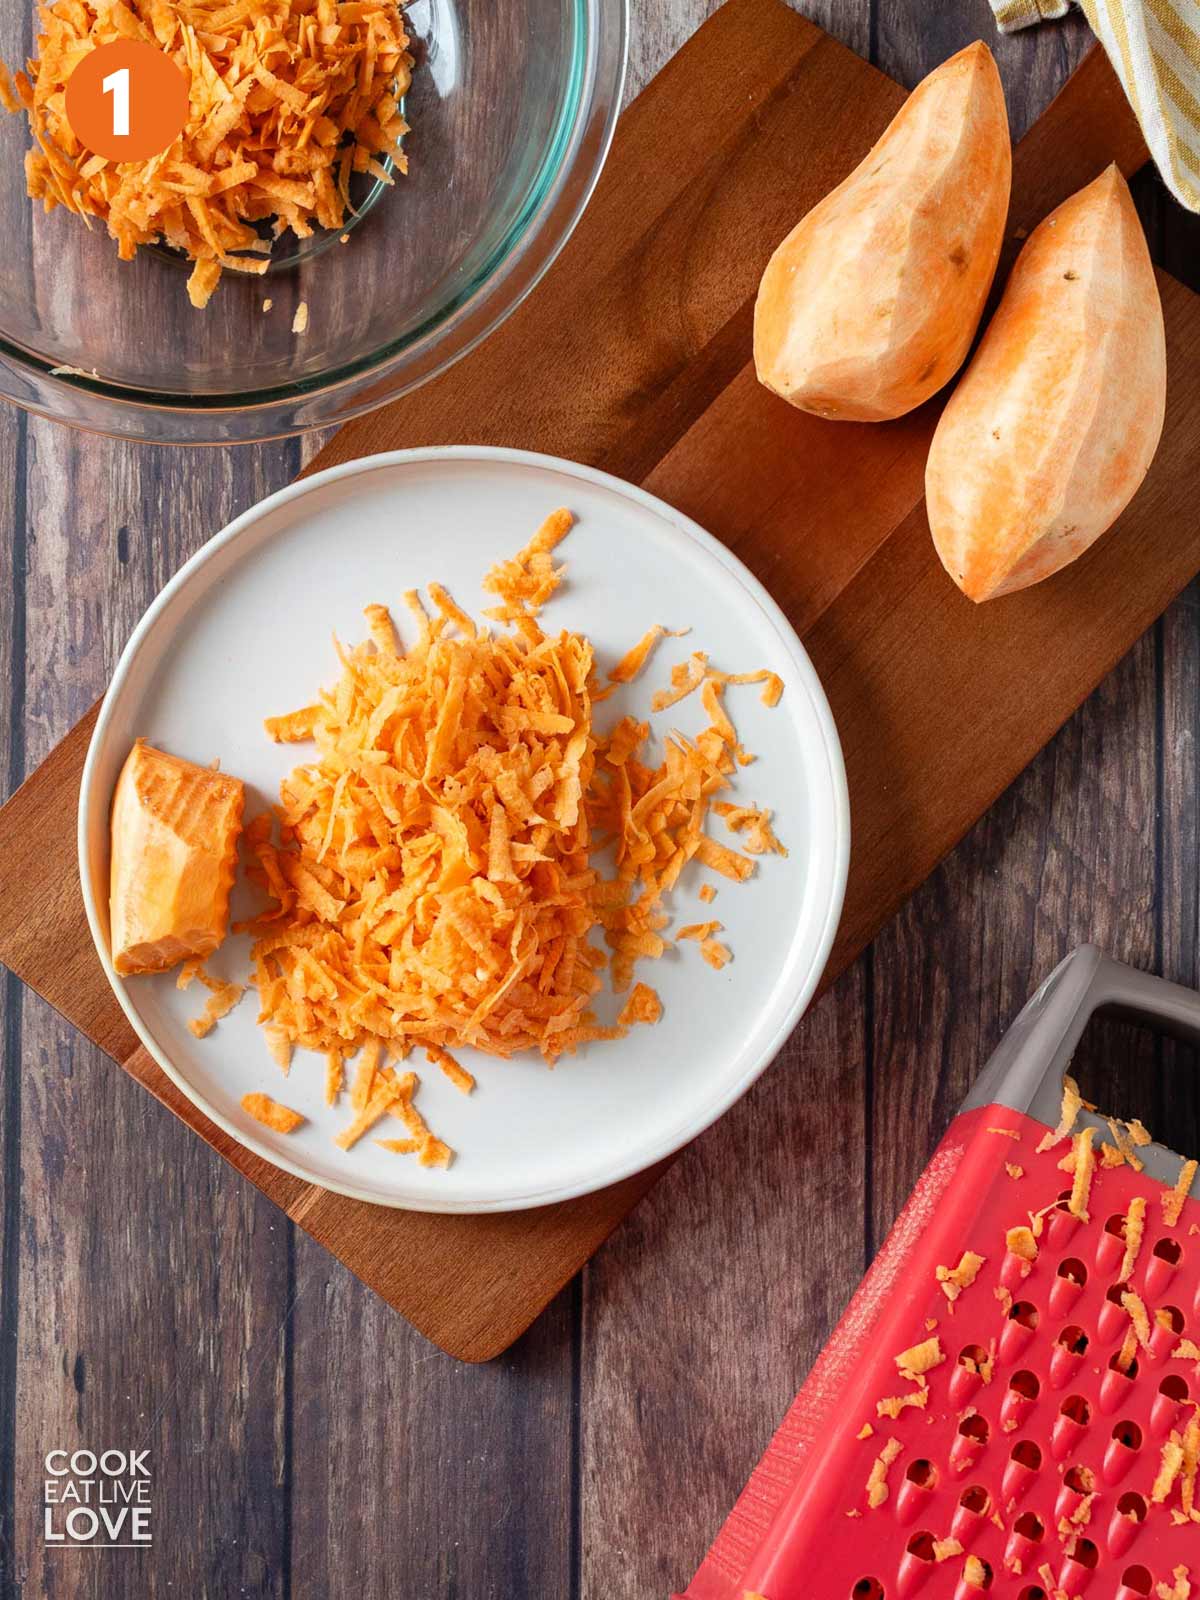 Shredded sweet potatoes on a white plate with a box grater in the corner.